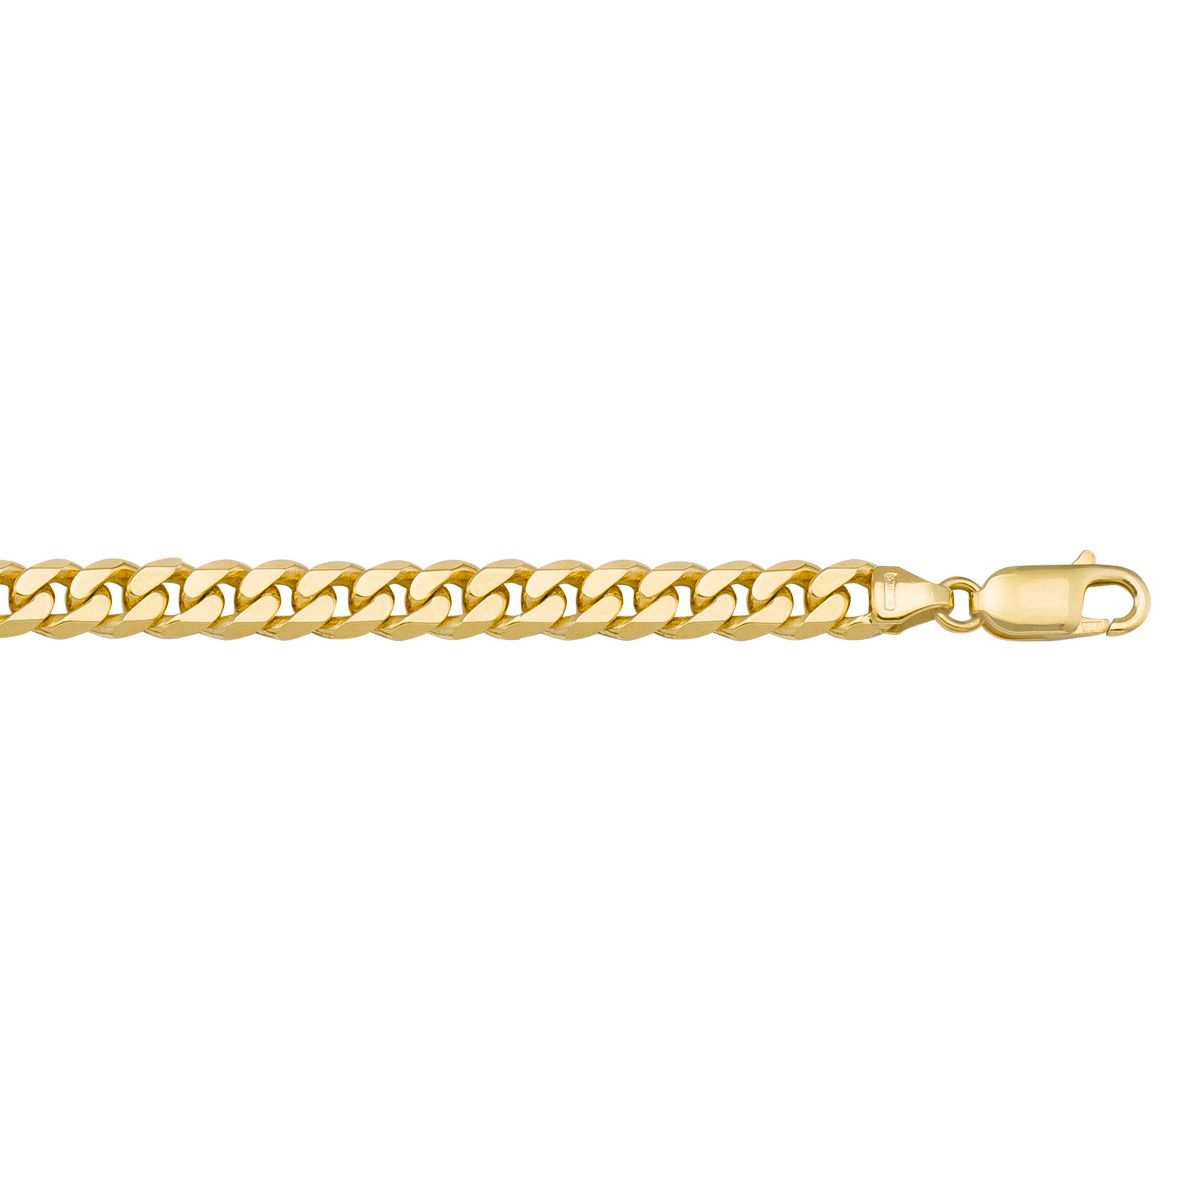 CCRB02, Gold Chain, Flat Beveled Curb, Yellow Gold